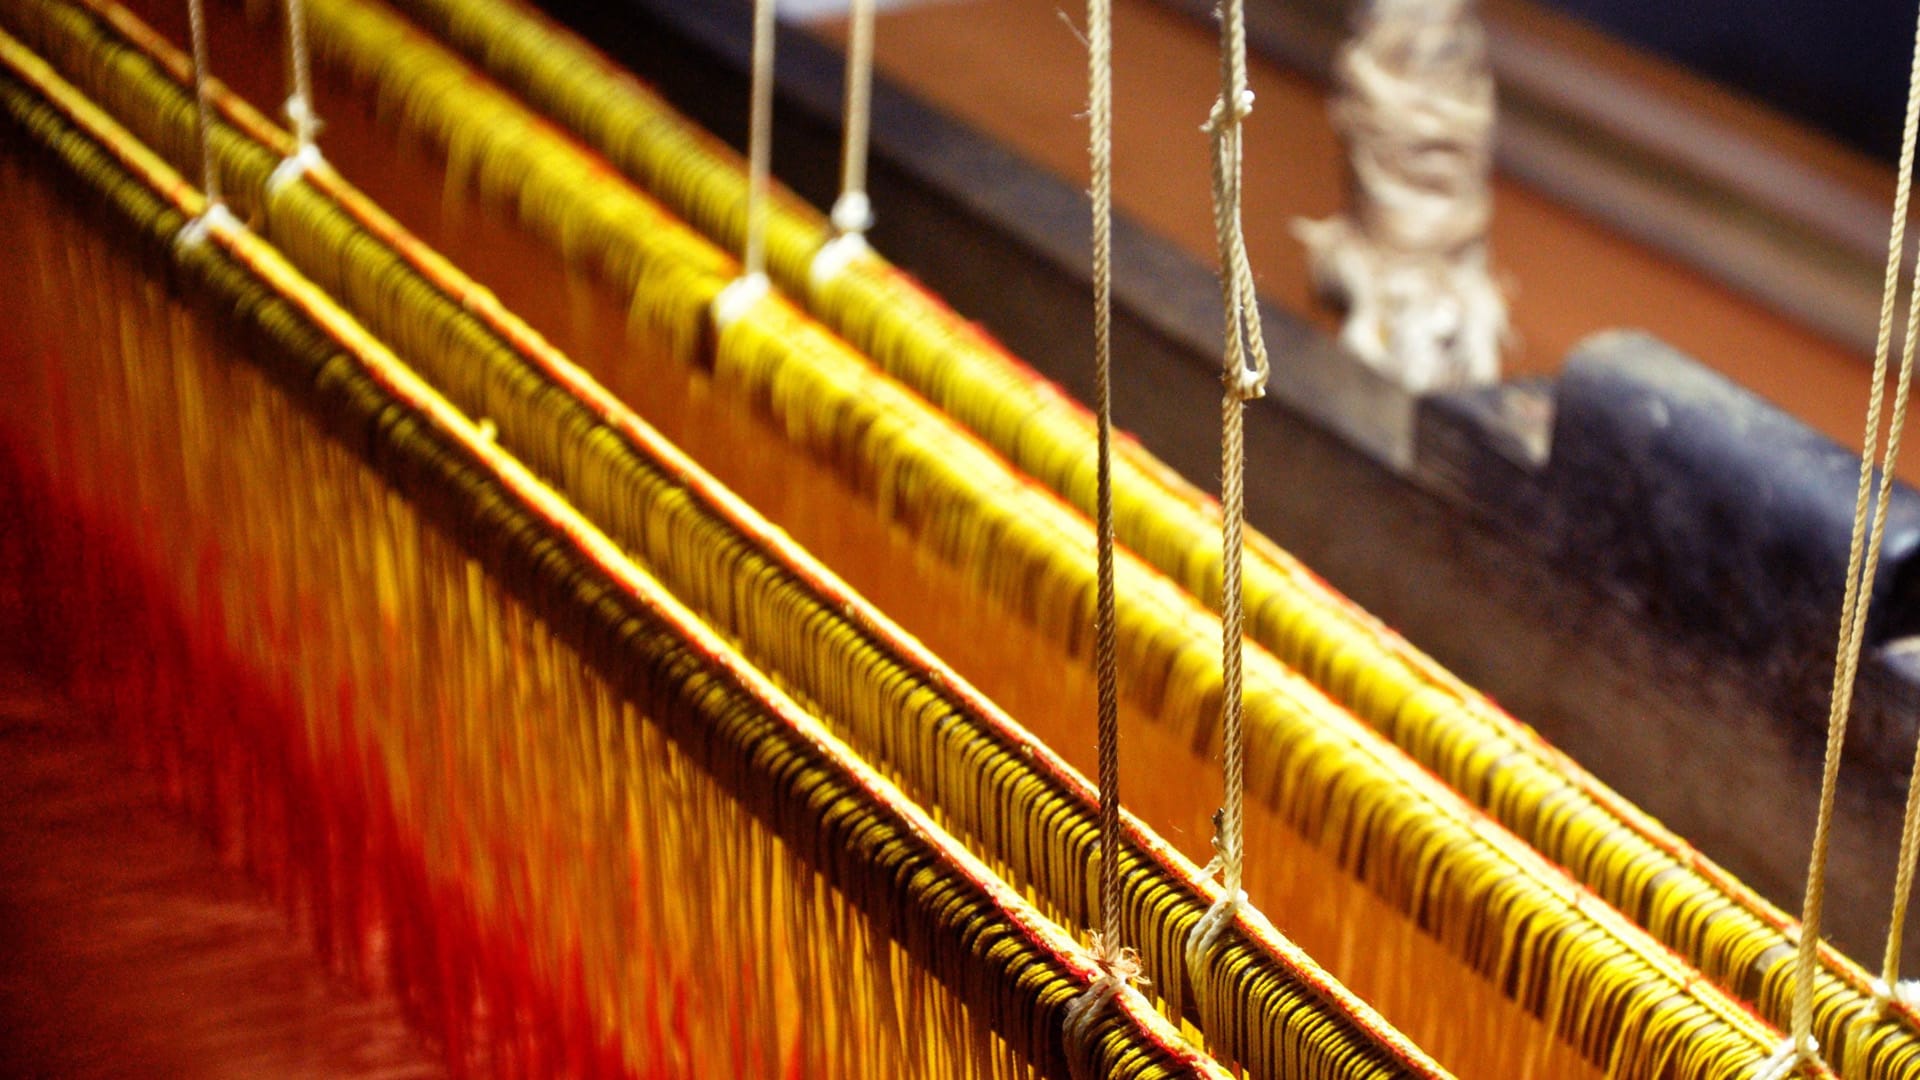 Govt forms panel to suggest ways to boost production, exports of handlooms